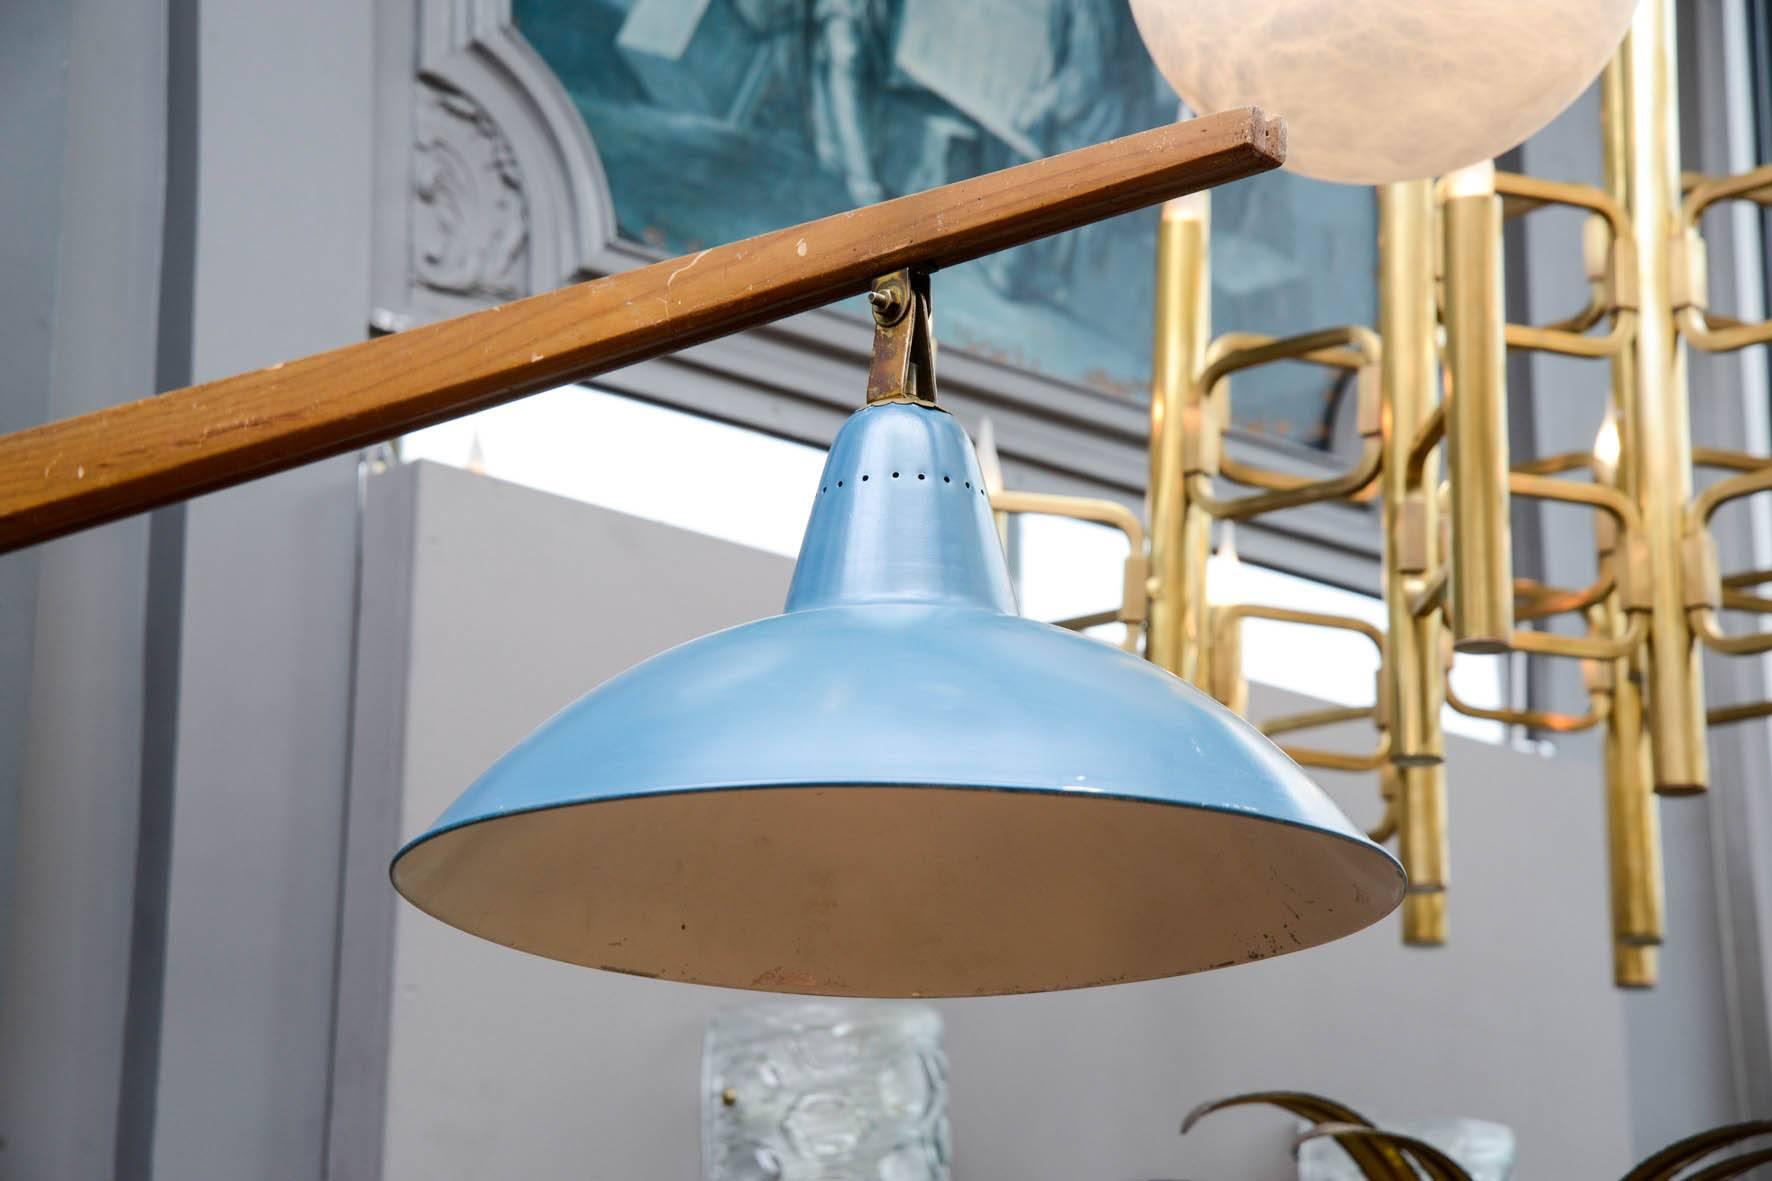 Unusual big wall sconce, made of a right angled wood structure finished by a blue enameled sconce.